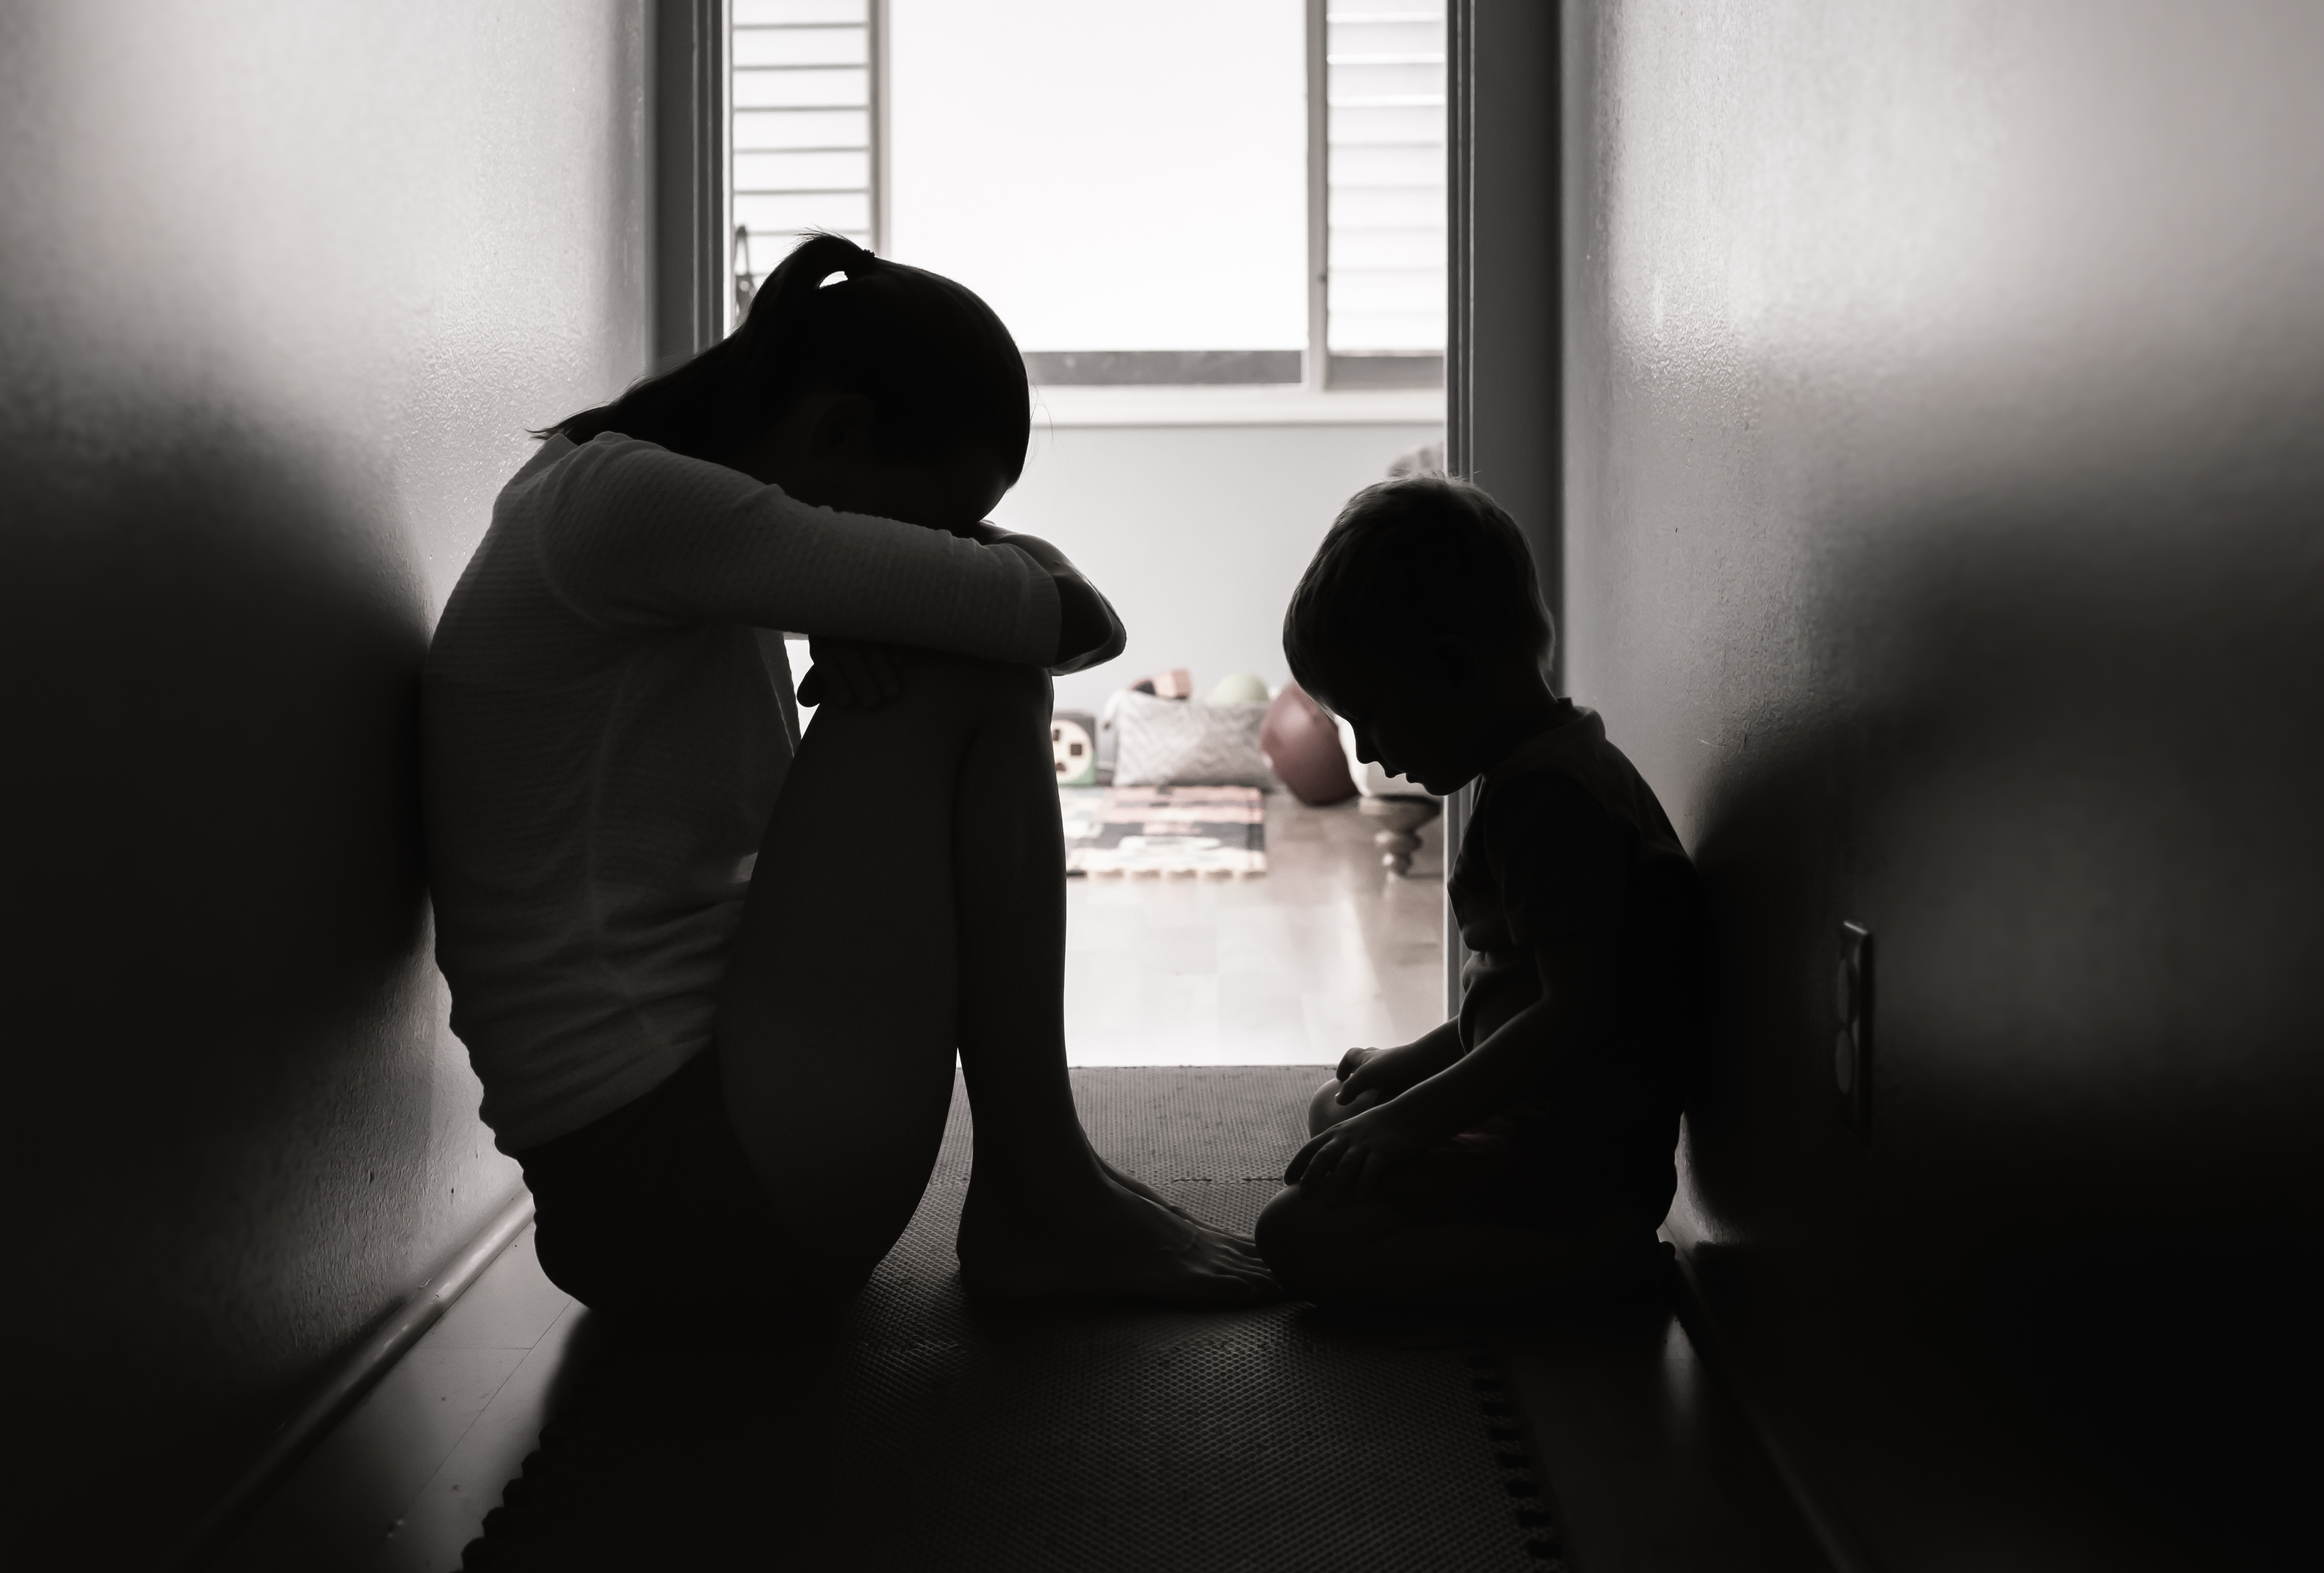 A woman and a boy sitting in a corridor with their heads bowed down | Source: Shutterstock